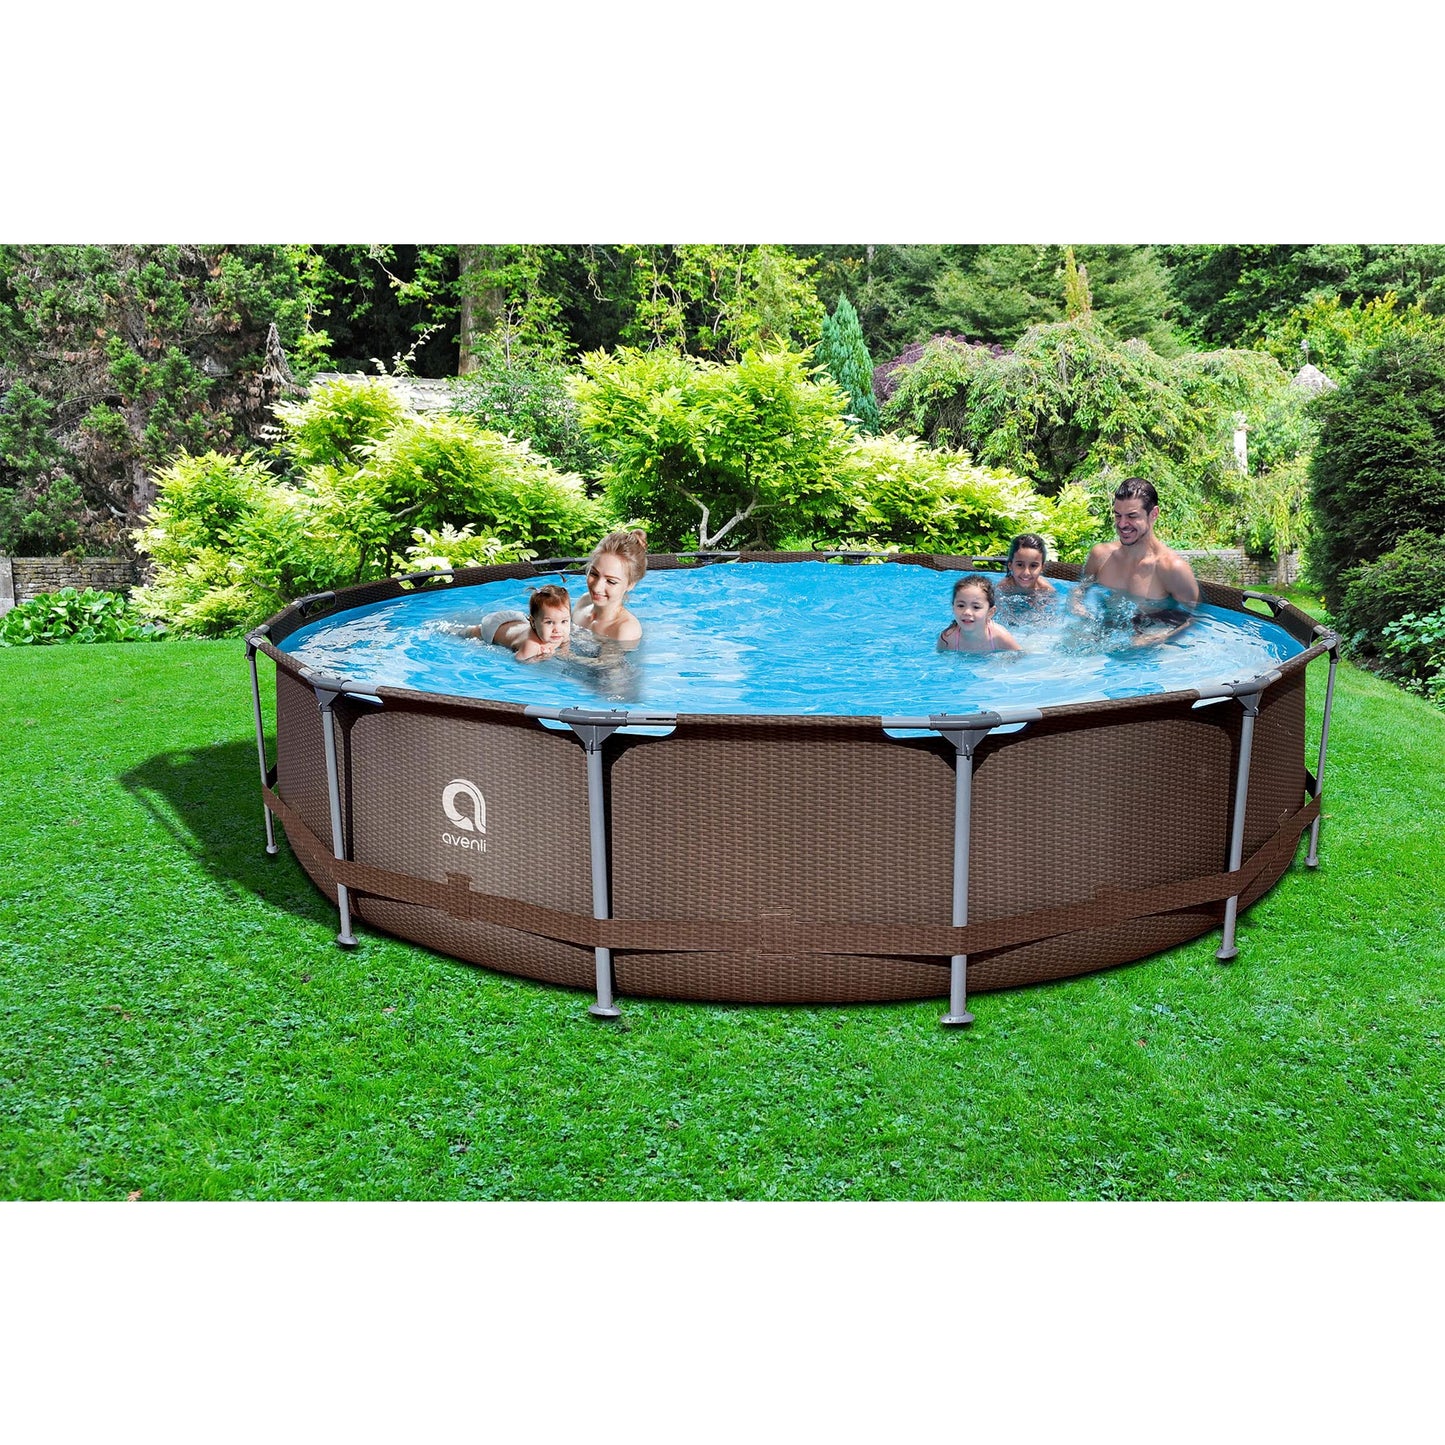 JLeisure Avenli 15 Foot x 33 Inch Round Steel Frame LamTech Above Ground Swimming Pool with Triangle Lock Frame System, Brown 15' x 33' Rattan Brown